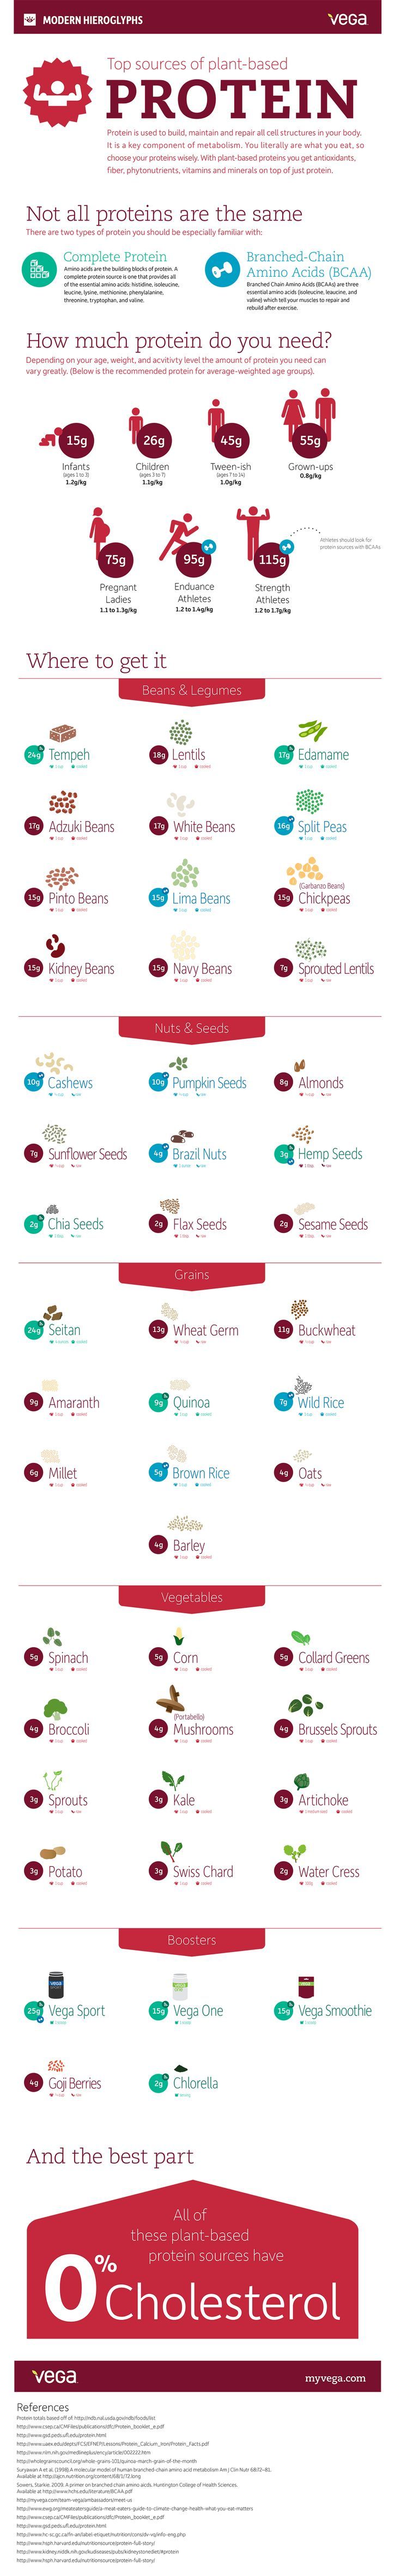 Plant Based Protein Sources Chart